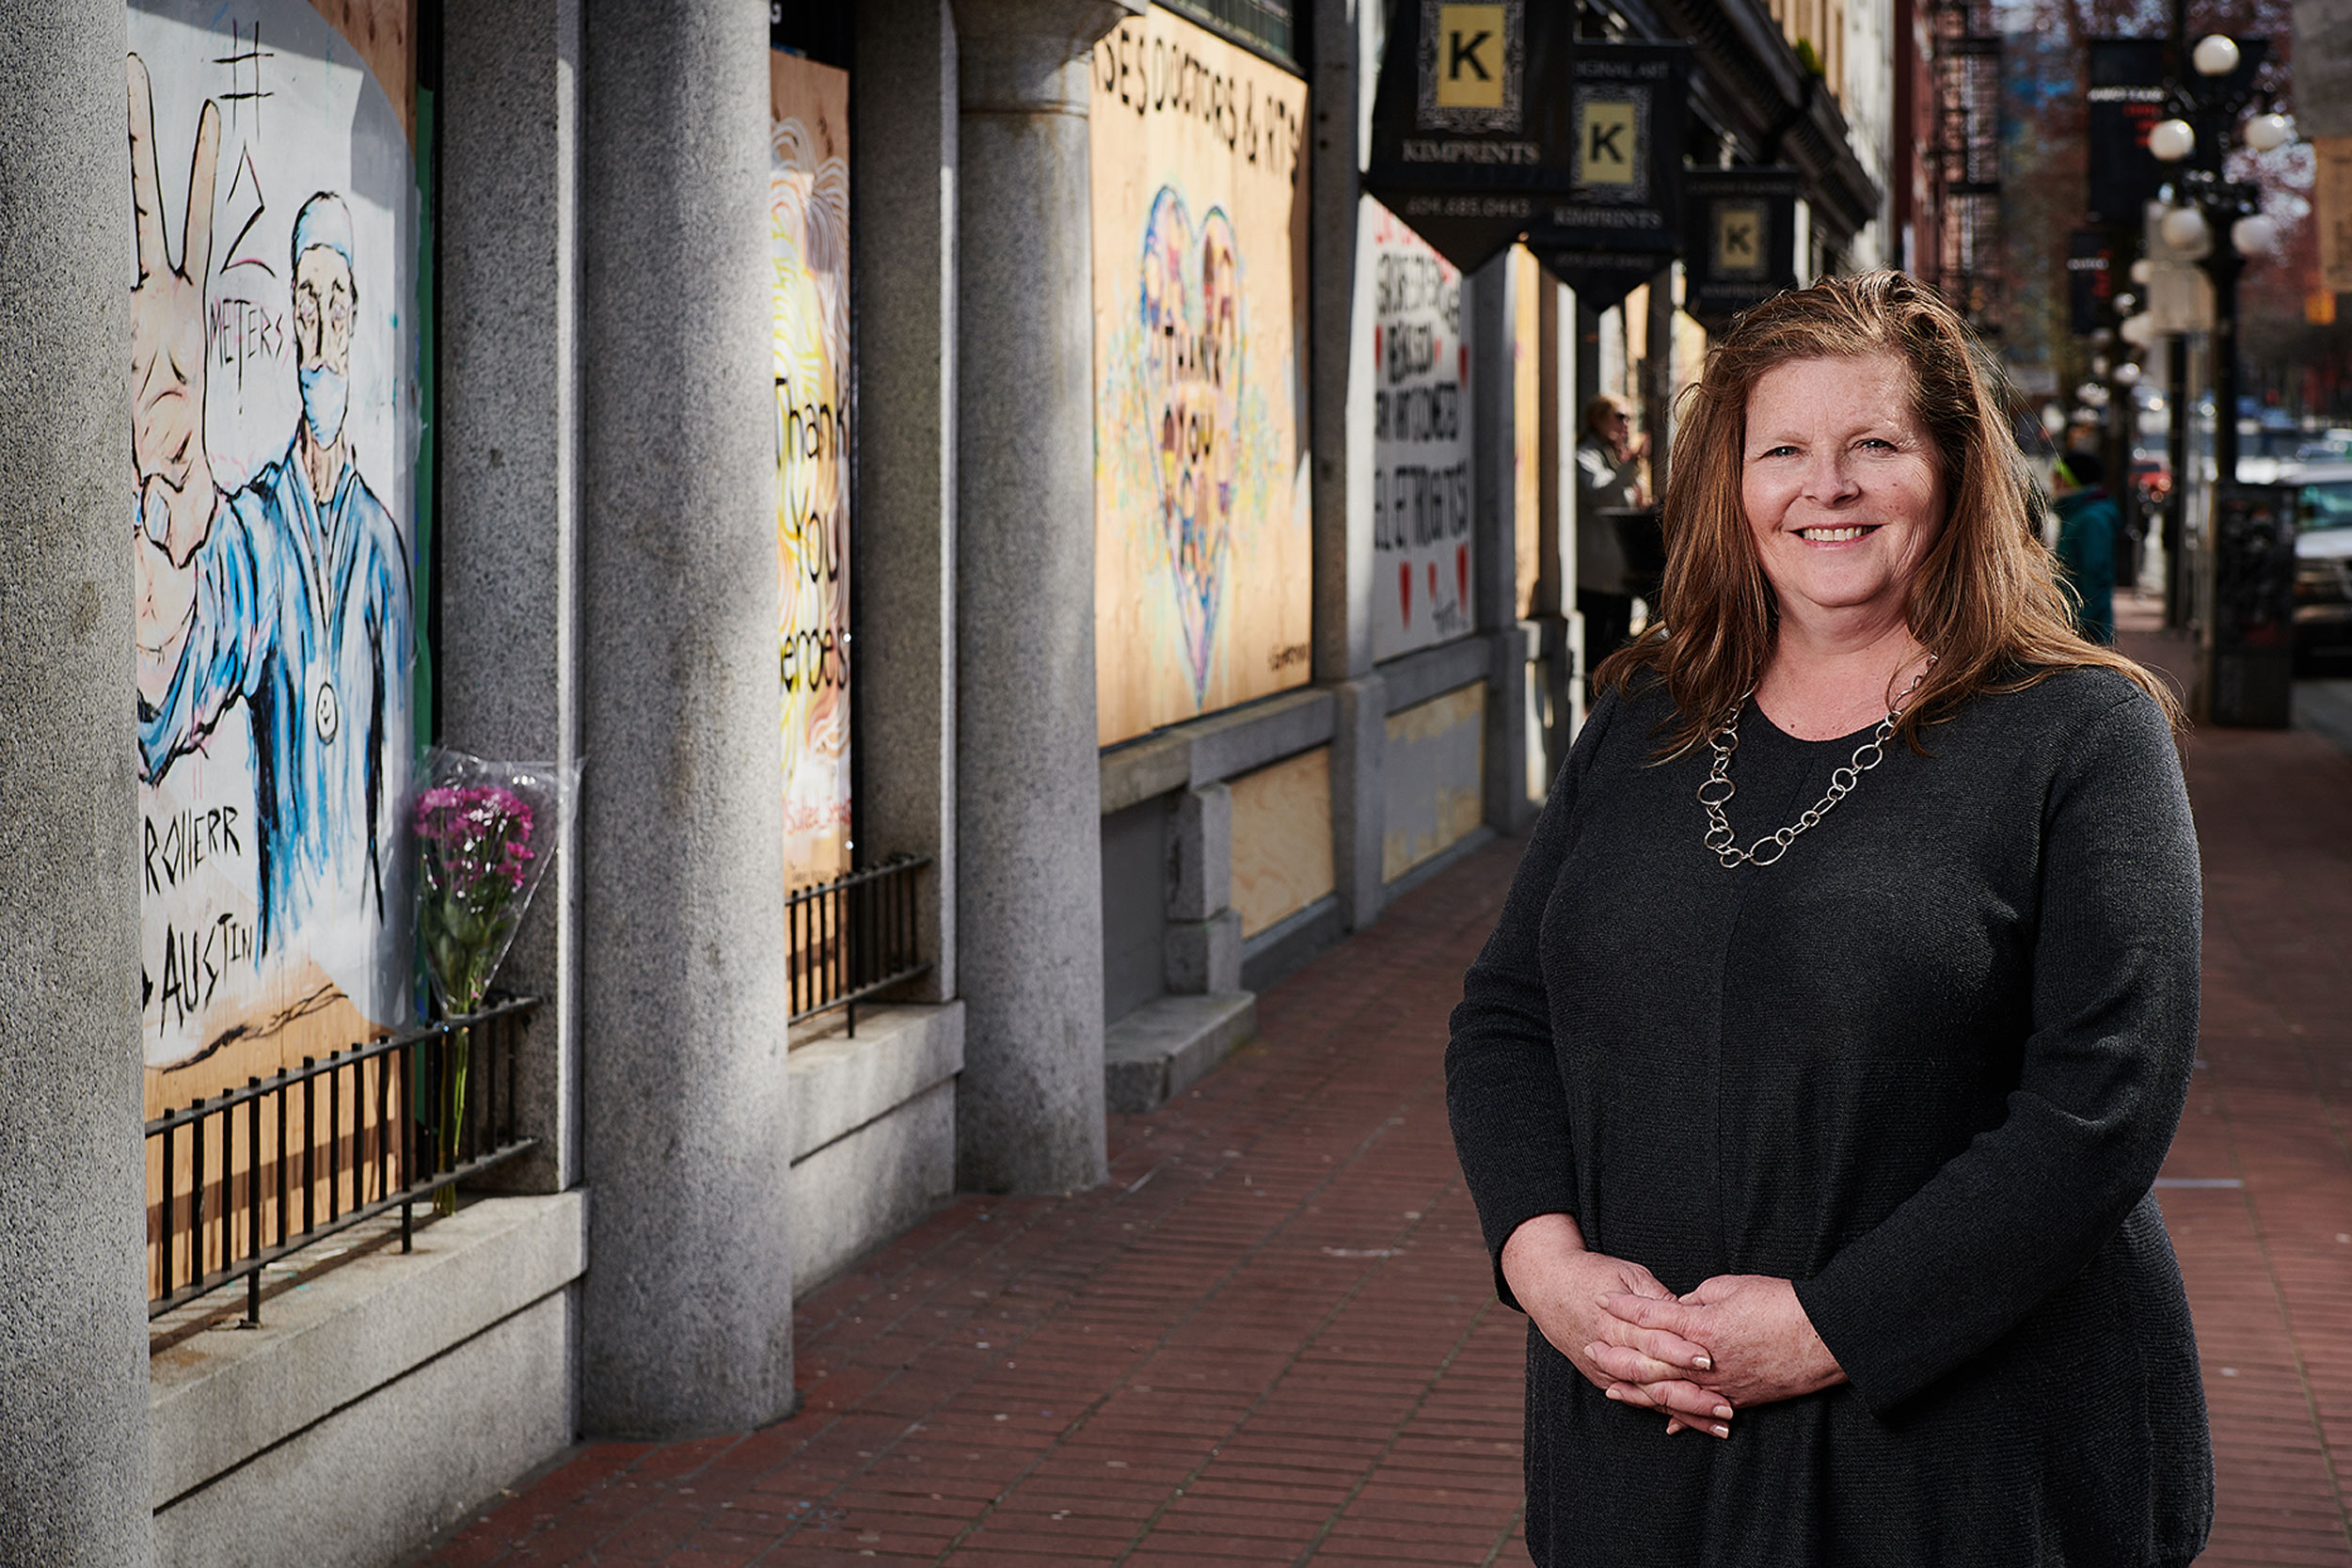 2020-Vancouver-HumansOfSupport-Photographer-ErichSaide-Advertising-PassionProject-COVID-19-Portrait-HumansOfSupport-FrontlineHero-KimBriscoe-OurGastown-Murals